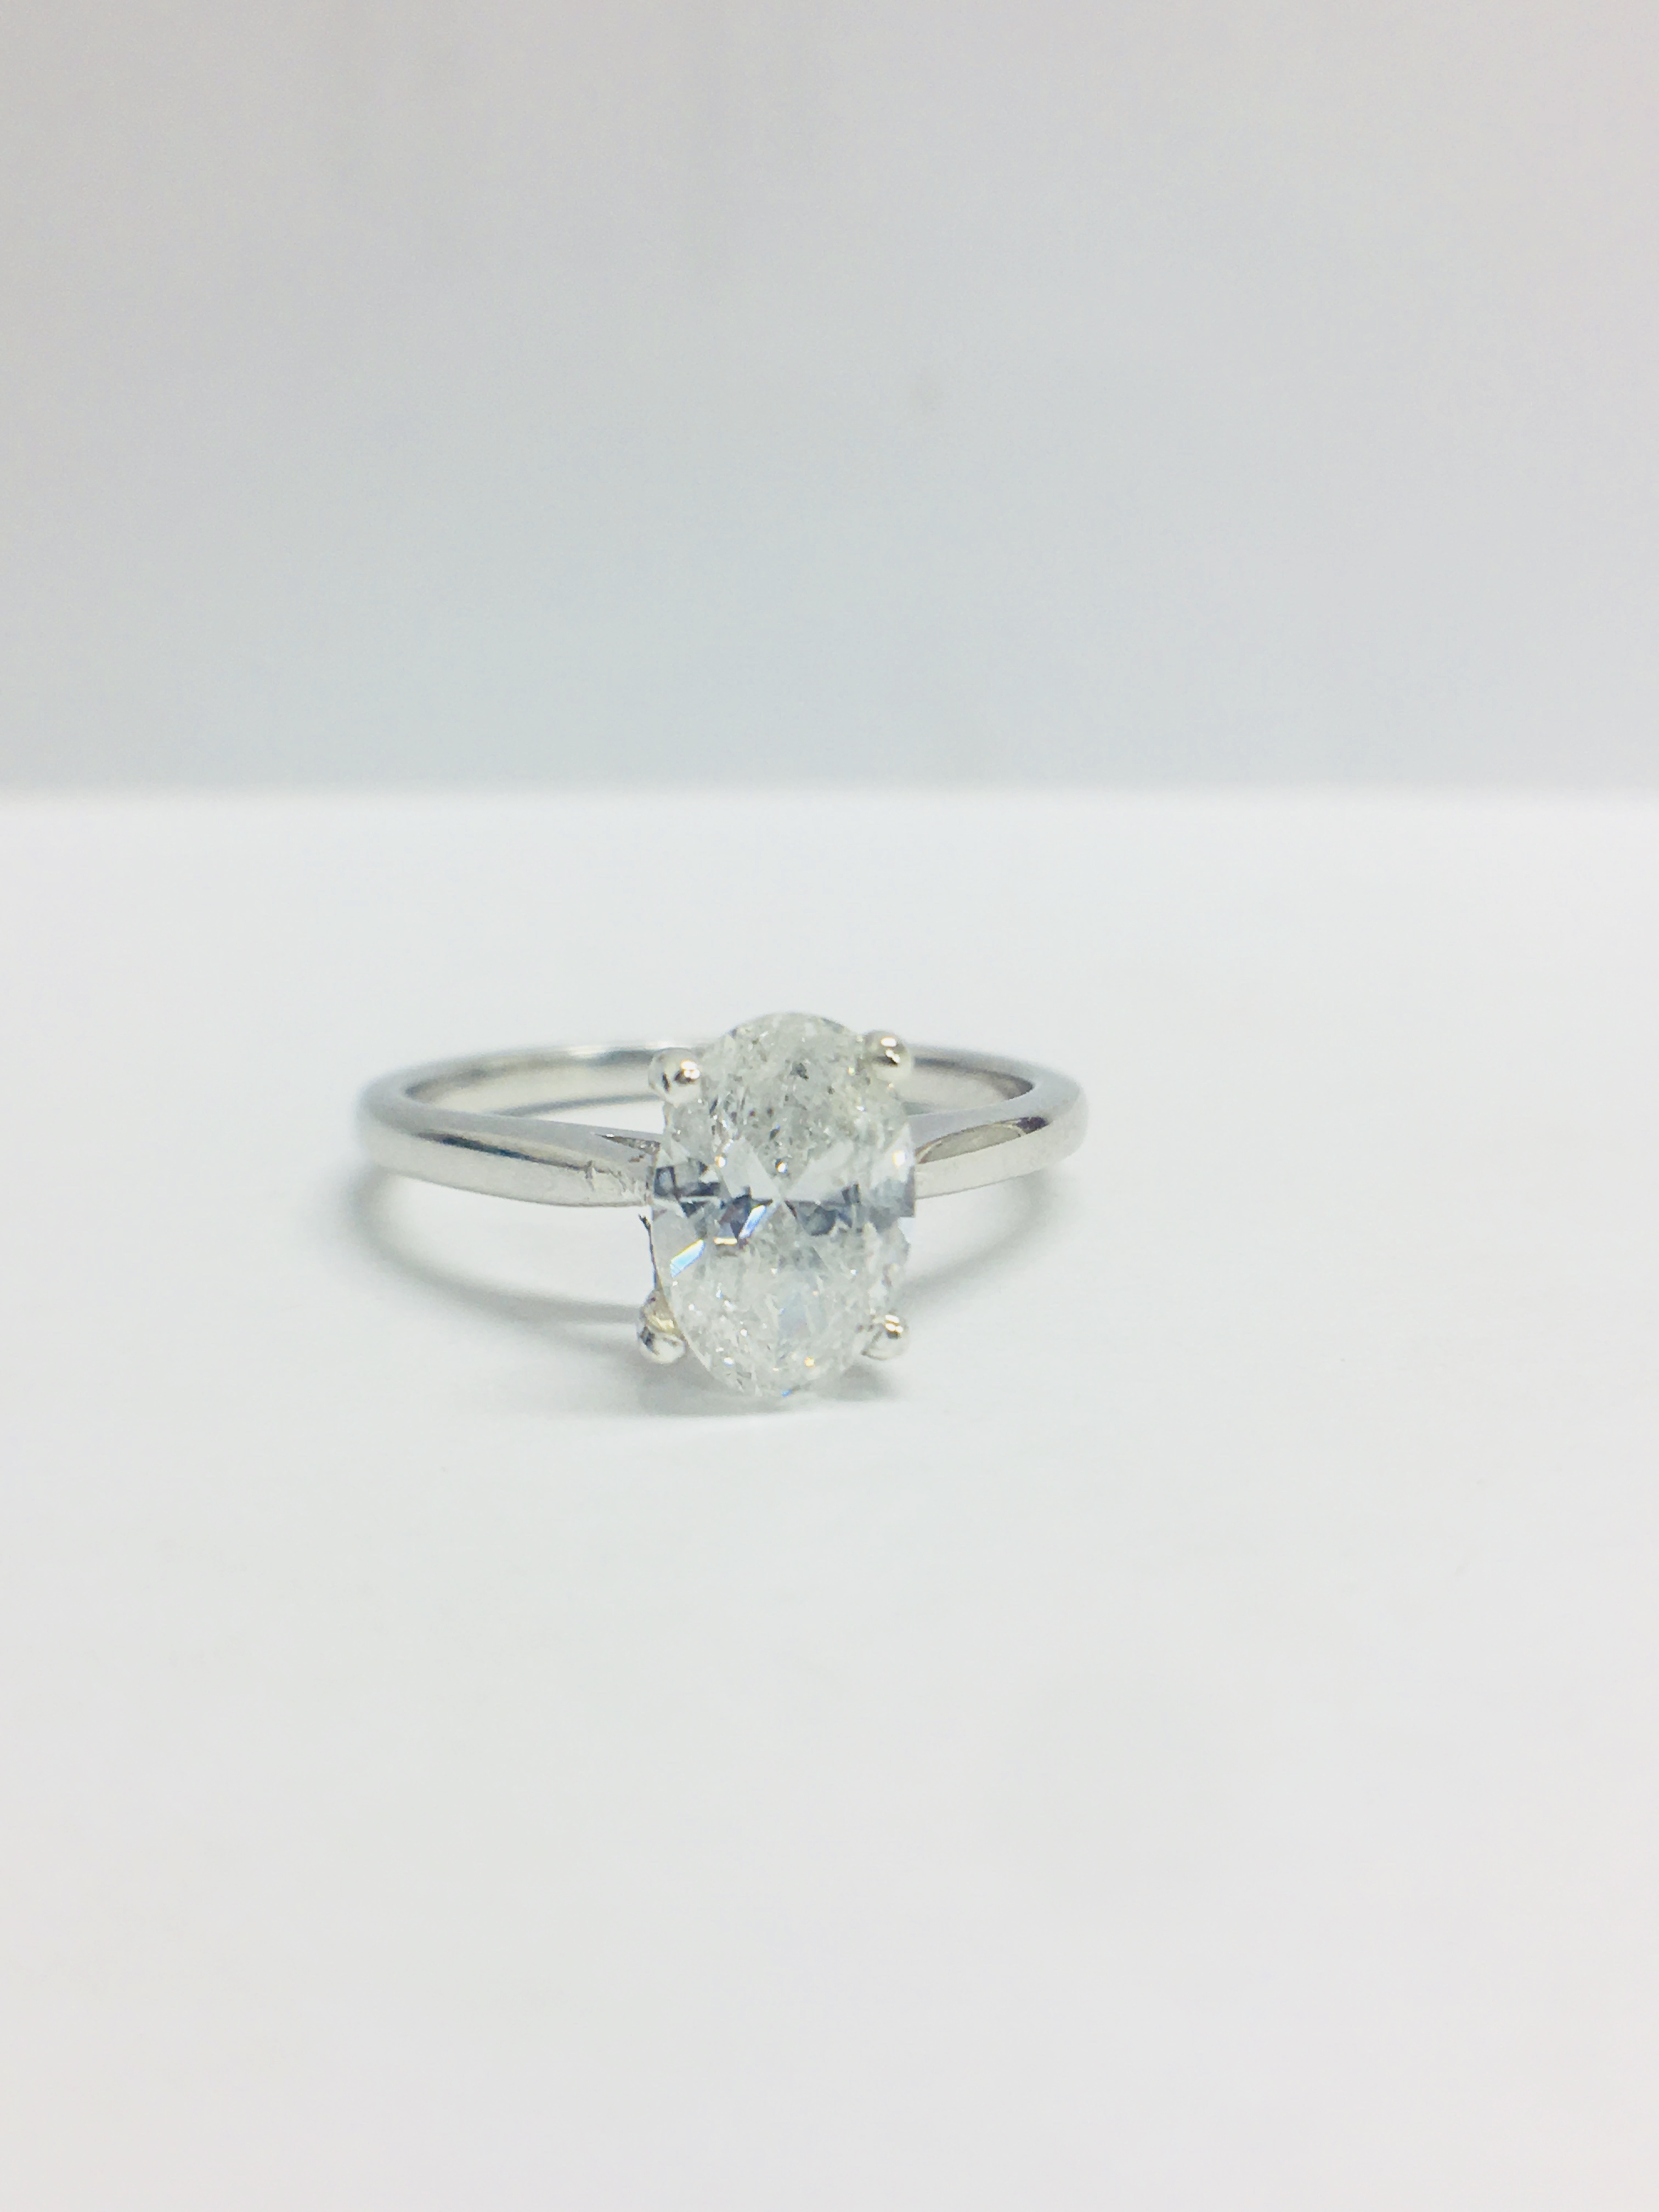 Platinum Oval Cut Diamond Solitaire Ring, - Image 9 of 9